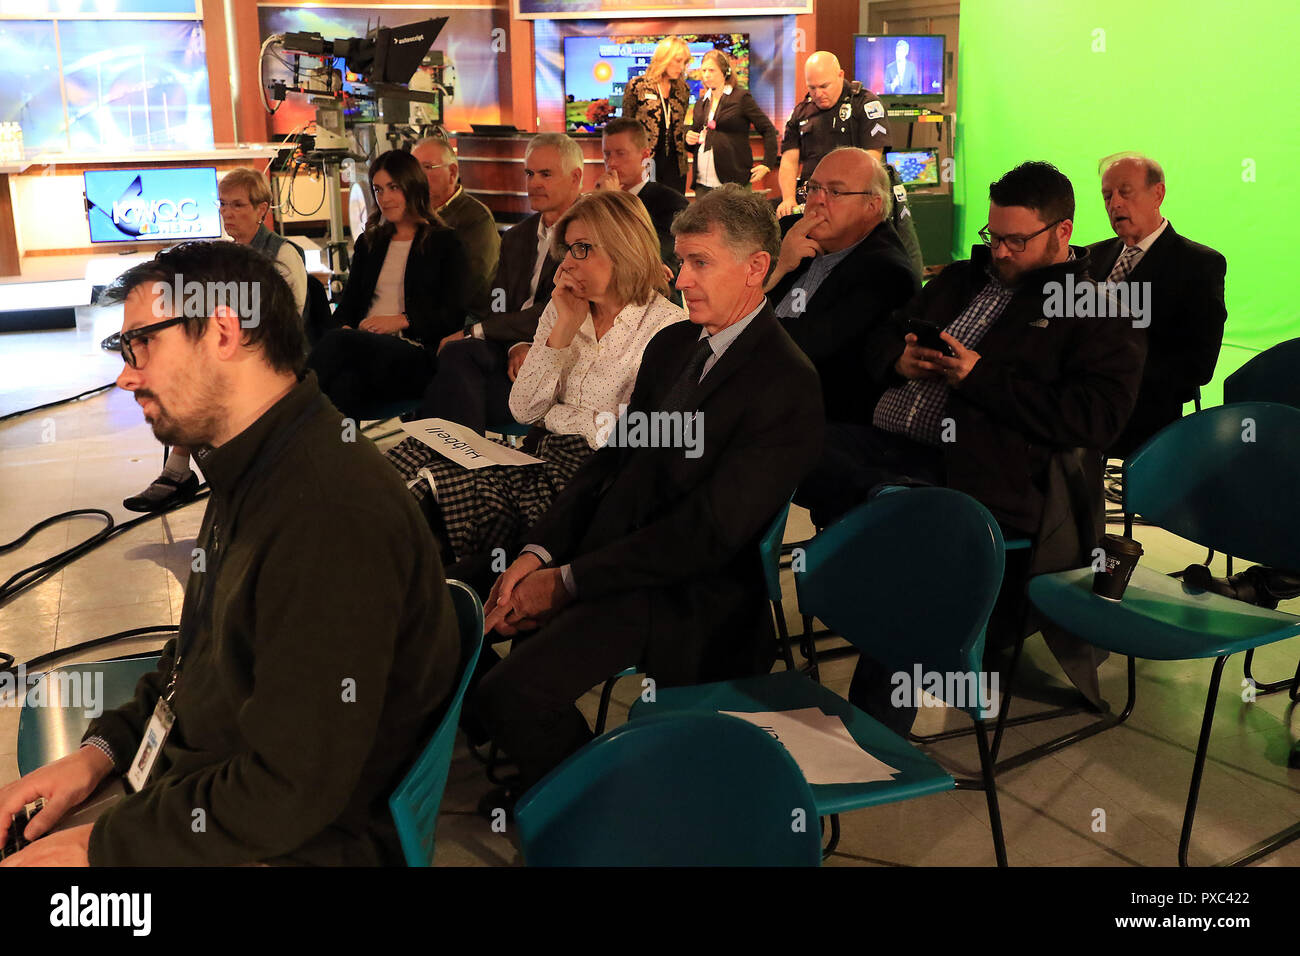 Davenport, Iowa, USA. 21st Oct, 2018. Friends and family listen as Iowa Governor Kim Reynolds and democratic candidate Fred Hubbell debate Sunday morning, October 21, 2018 in the KWQC studios in Davenport, Iowa. Credit: Kevin E. Schmidt/Quad-City Times/ZUMA Wire/Alamy Live News Stock Photo